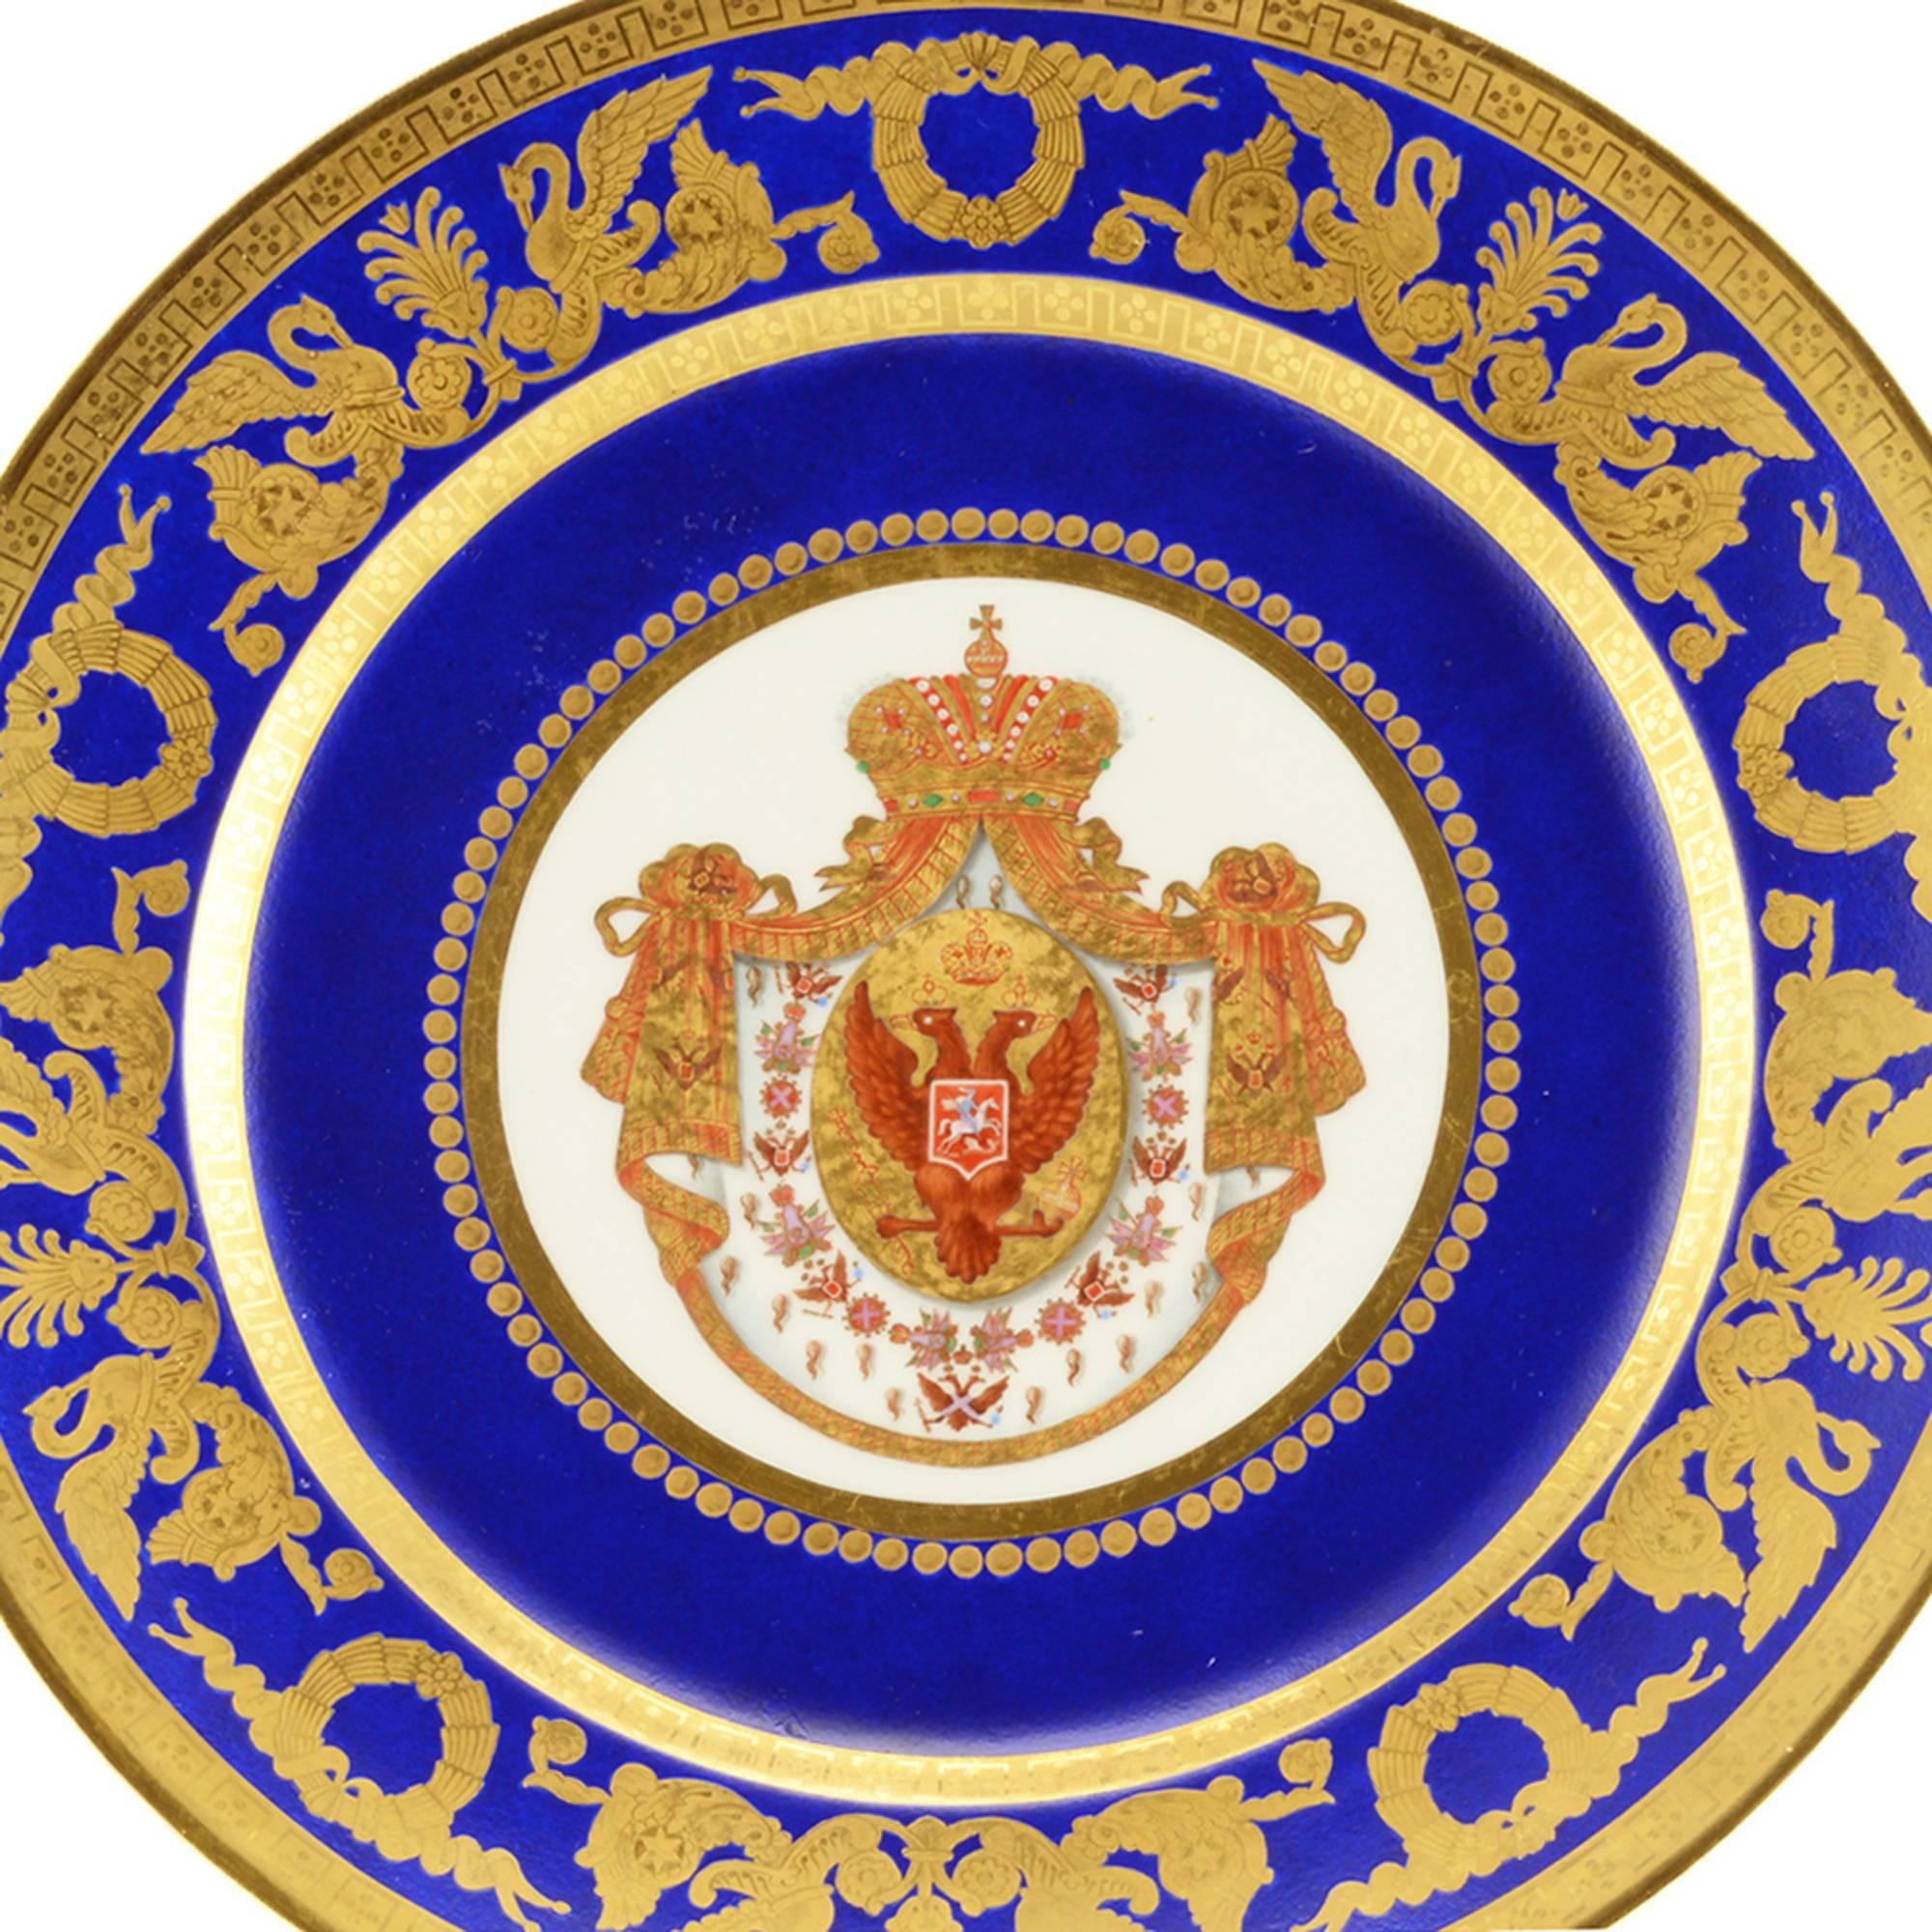 A Russian porcelain dessert plate from the Coronation service of Nicholas I, Imperial porcelain manufactory, period of Nicholas I (1825-1855), 1826. Centered with the Imperial arms including the collar of the Order of St. Andrew on an ermine-lined